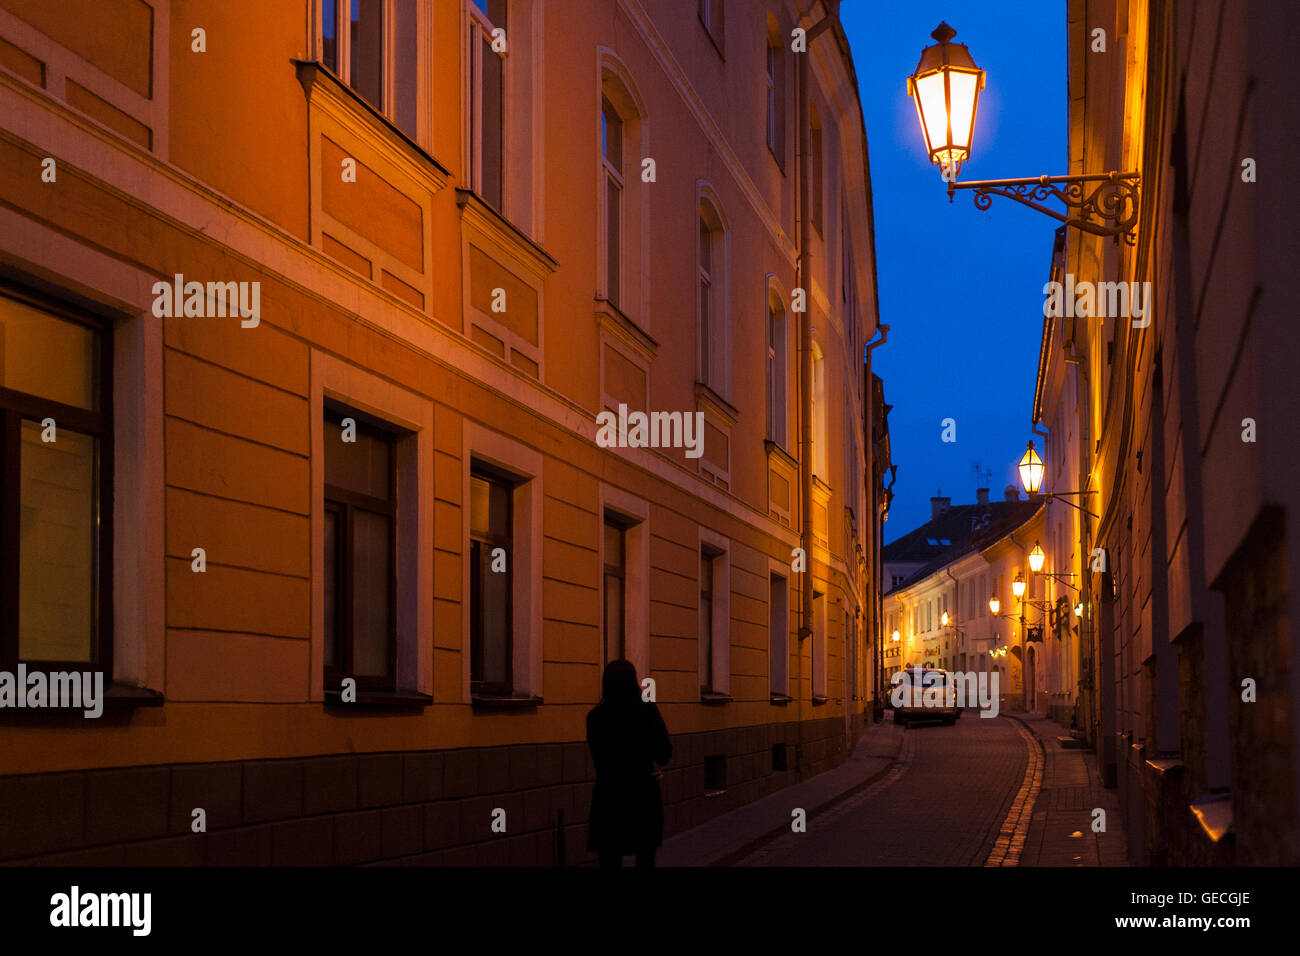 Walking down a twisting street past medieval architecture at night in the Lithuanian city of Vilnius Stock Photo